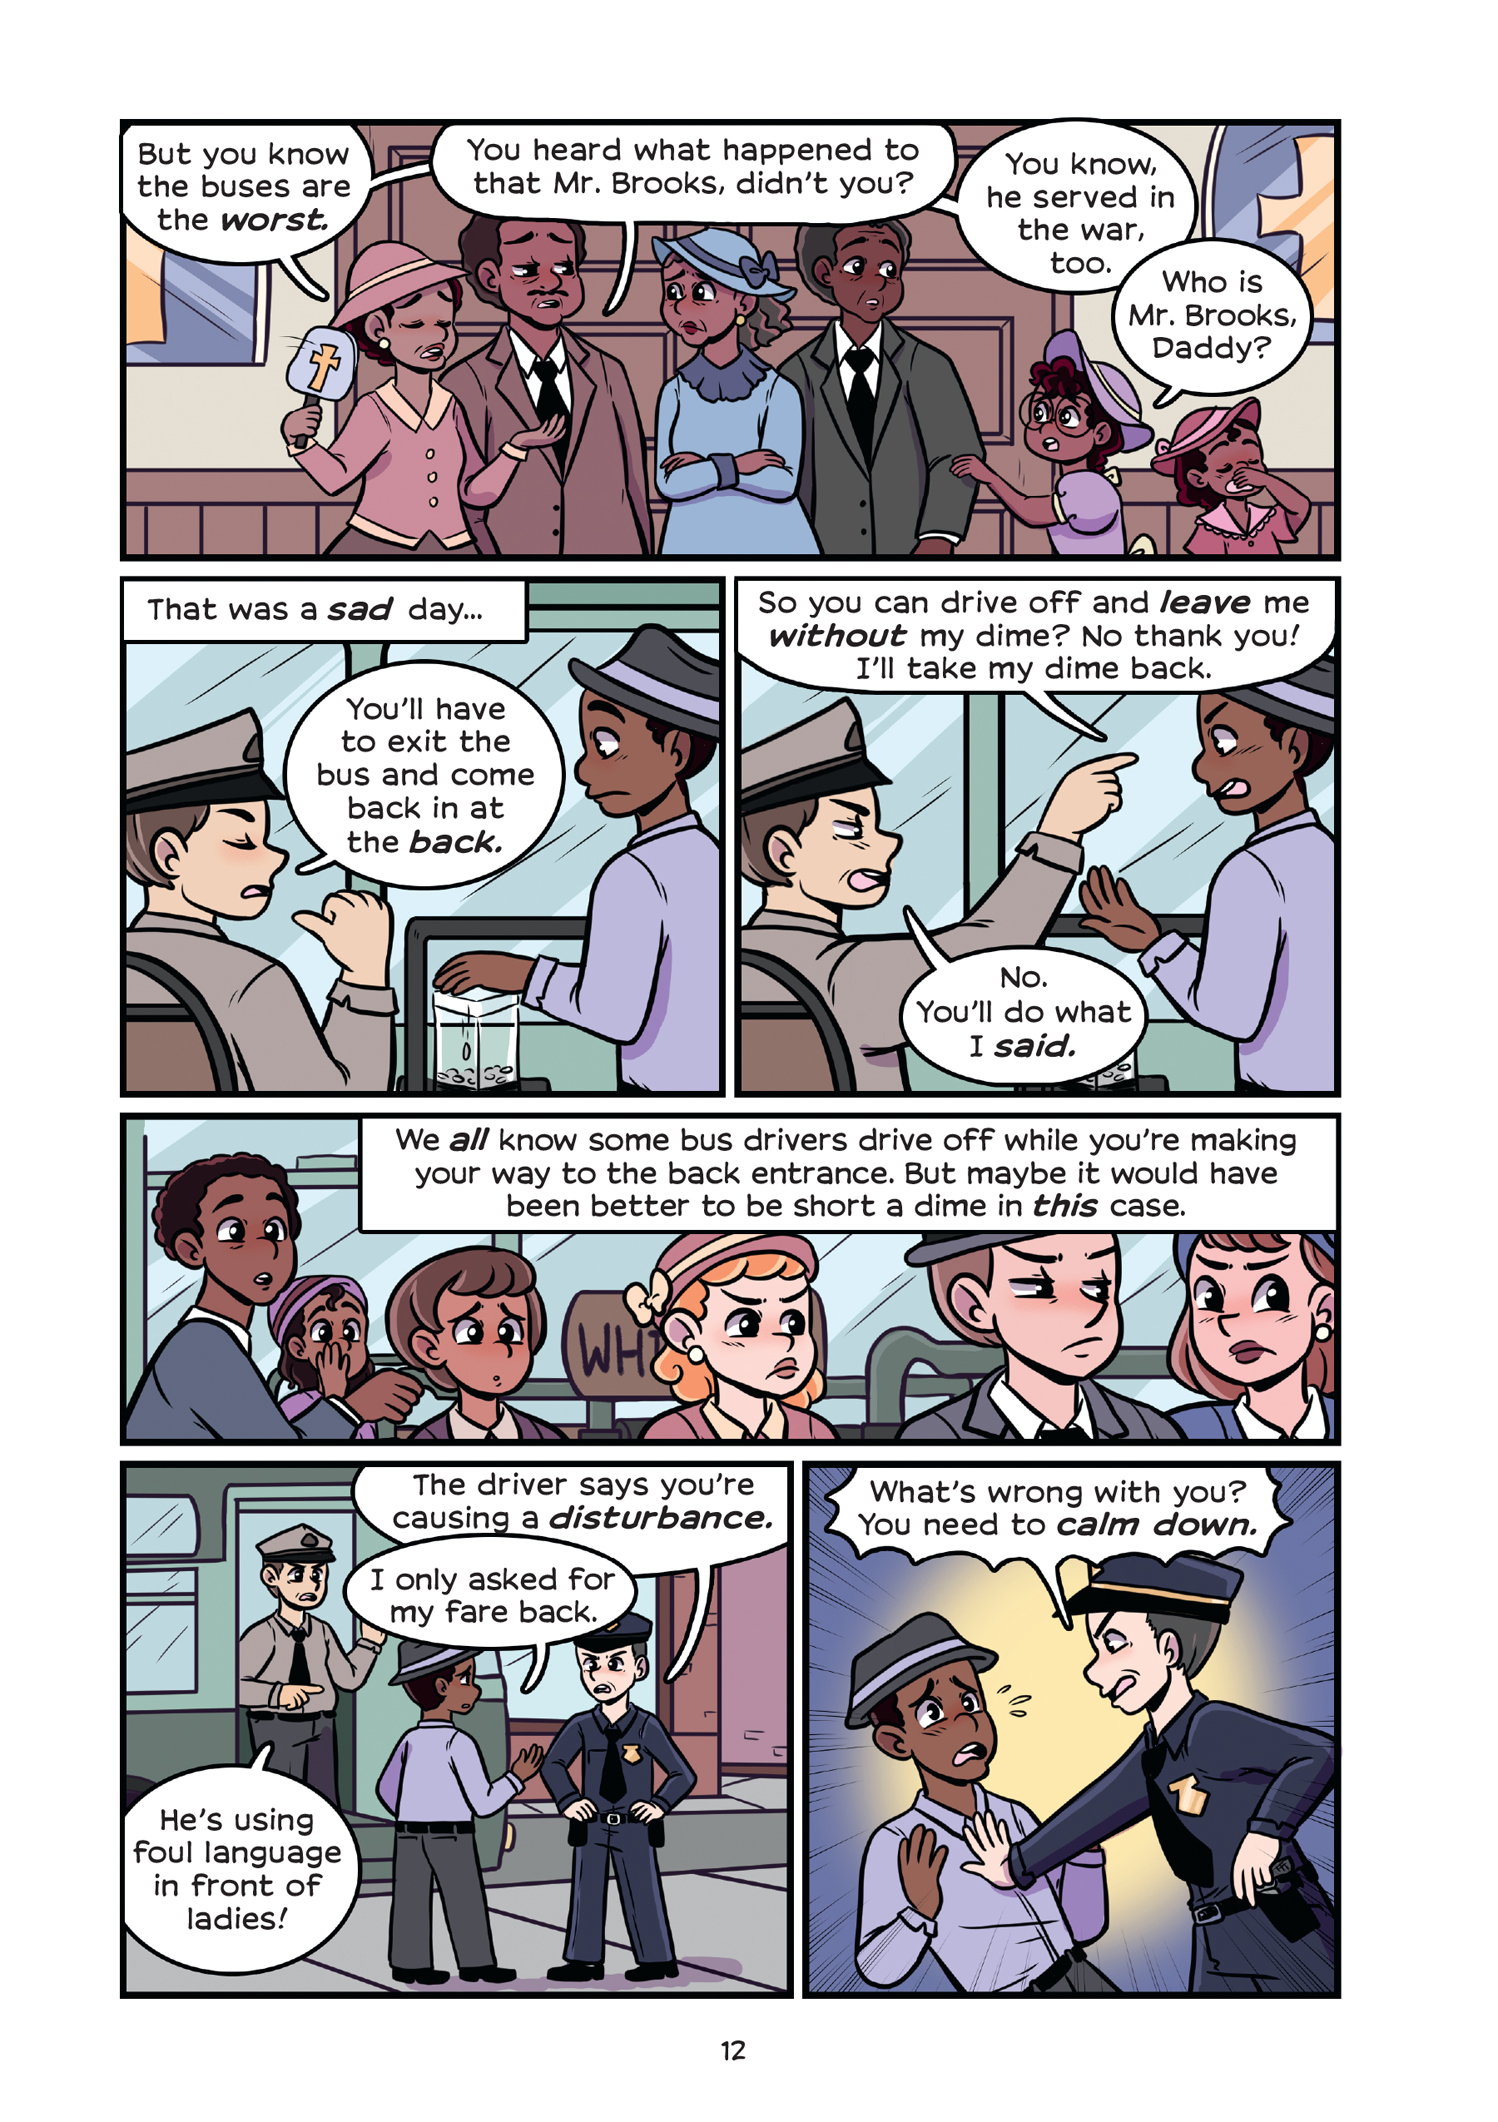 Read online History Comics comic -  Issue # Rosa Parks & Claudette Colvin - Civil Rights Heroes - 18